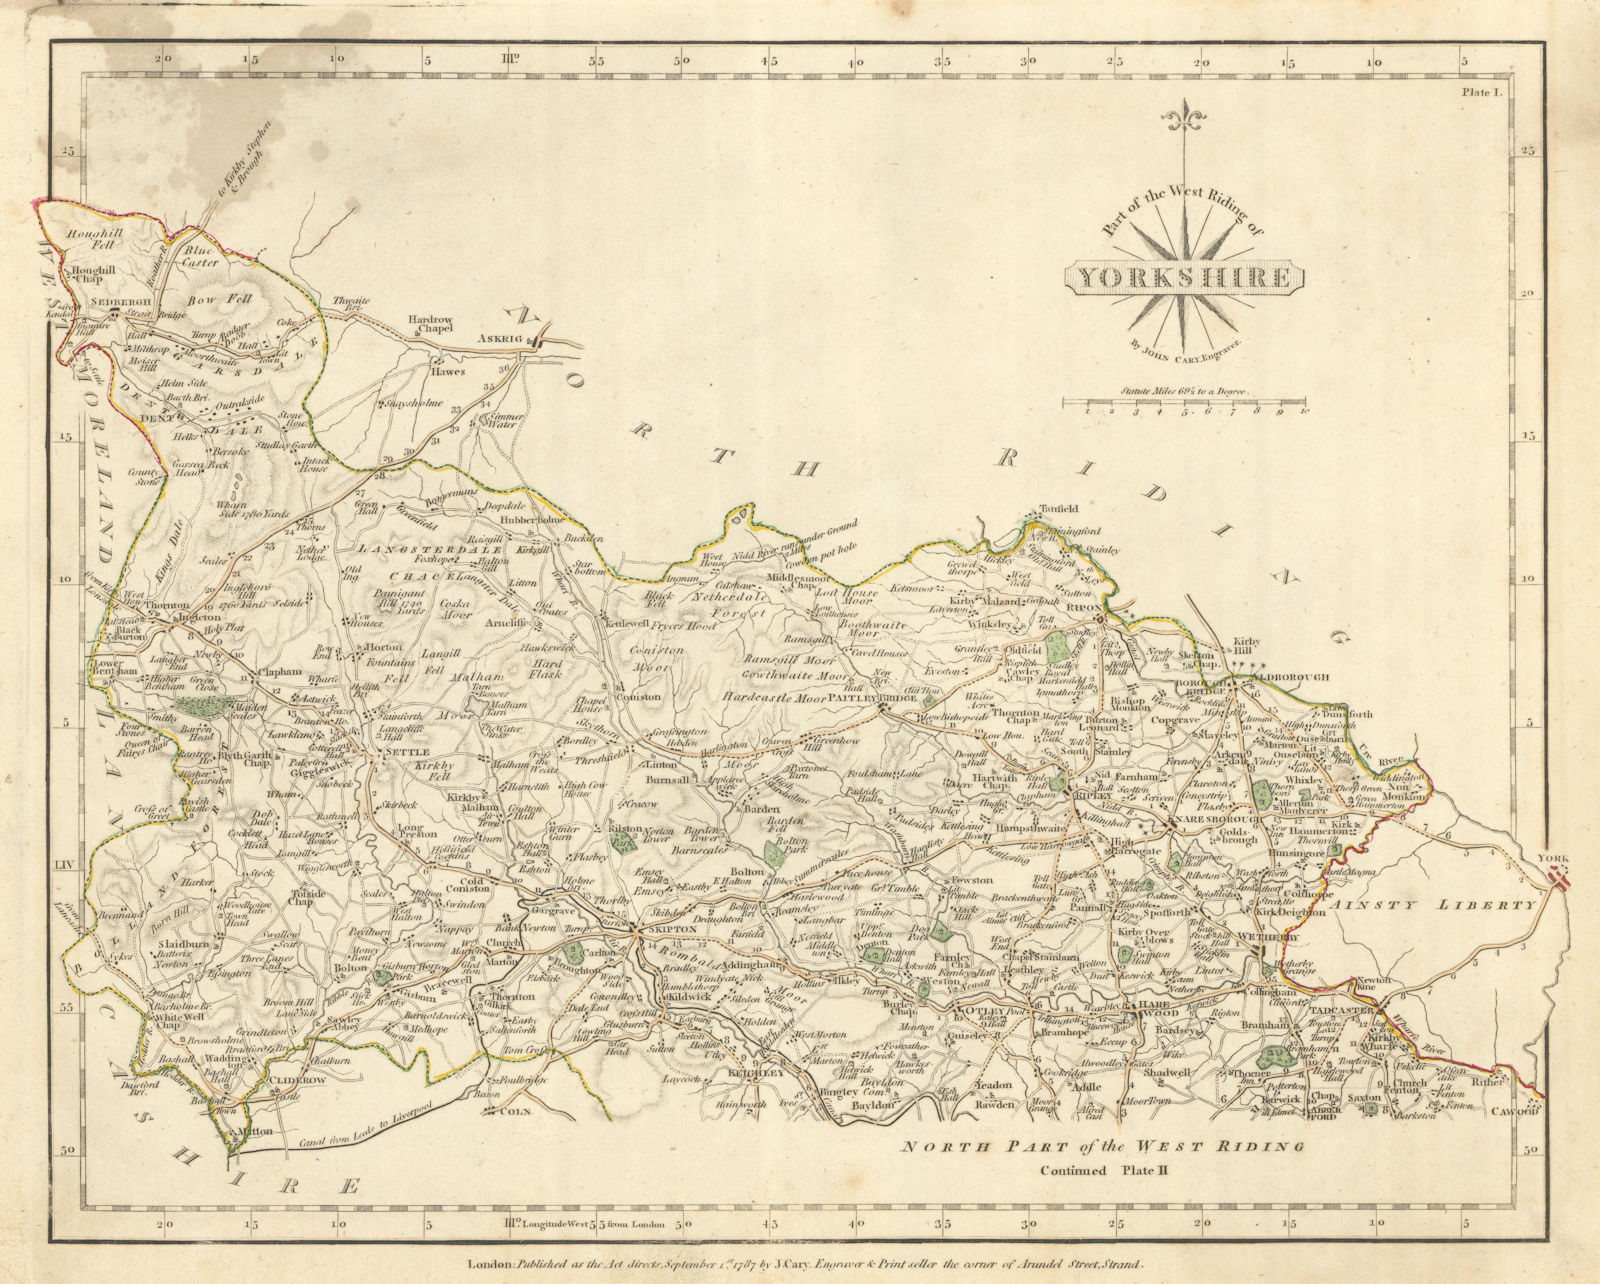 WEST RIDING OF YORKSHIRE-NORTH antique map by JOHN CARY. Original colour 1793